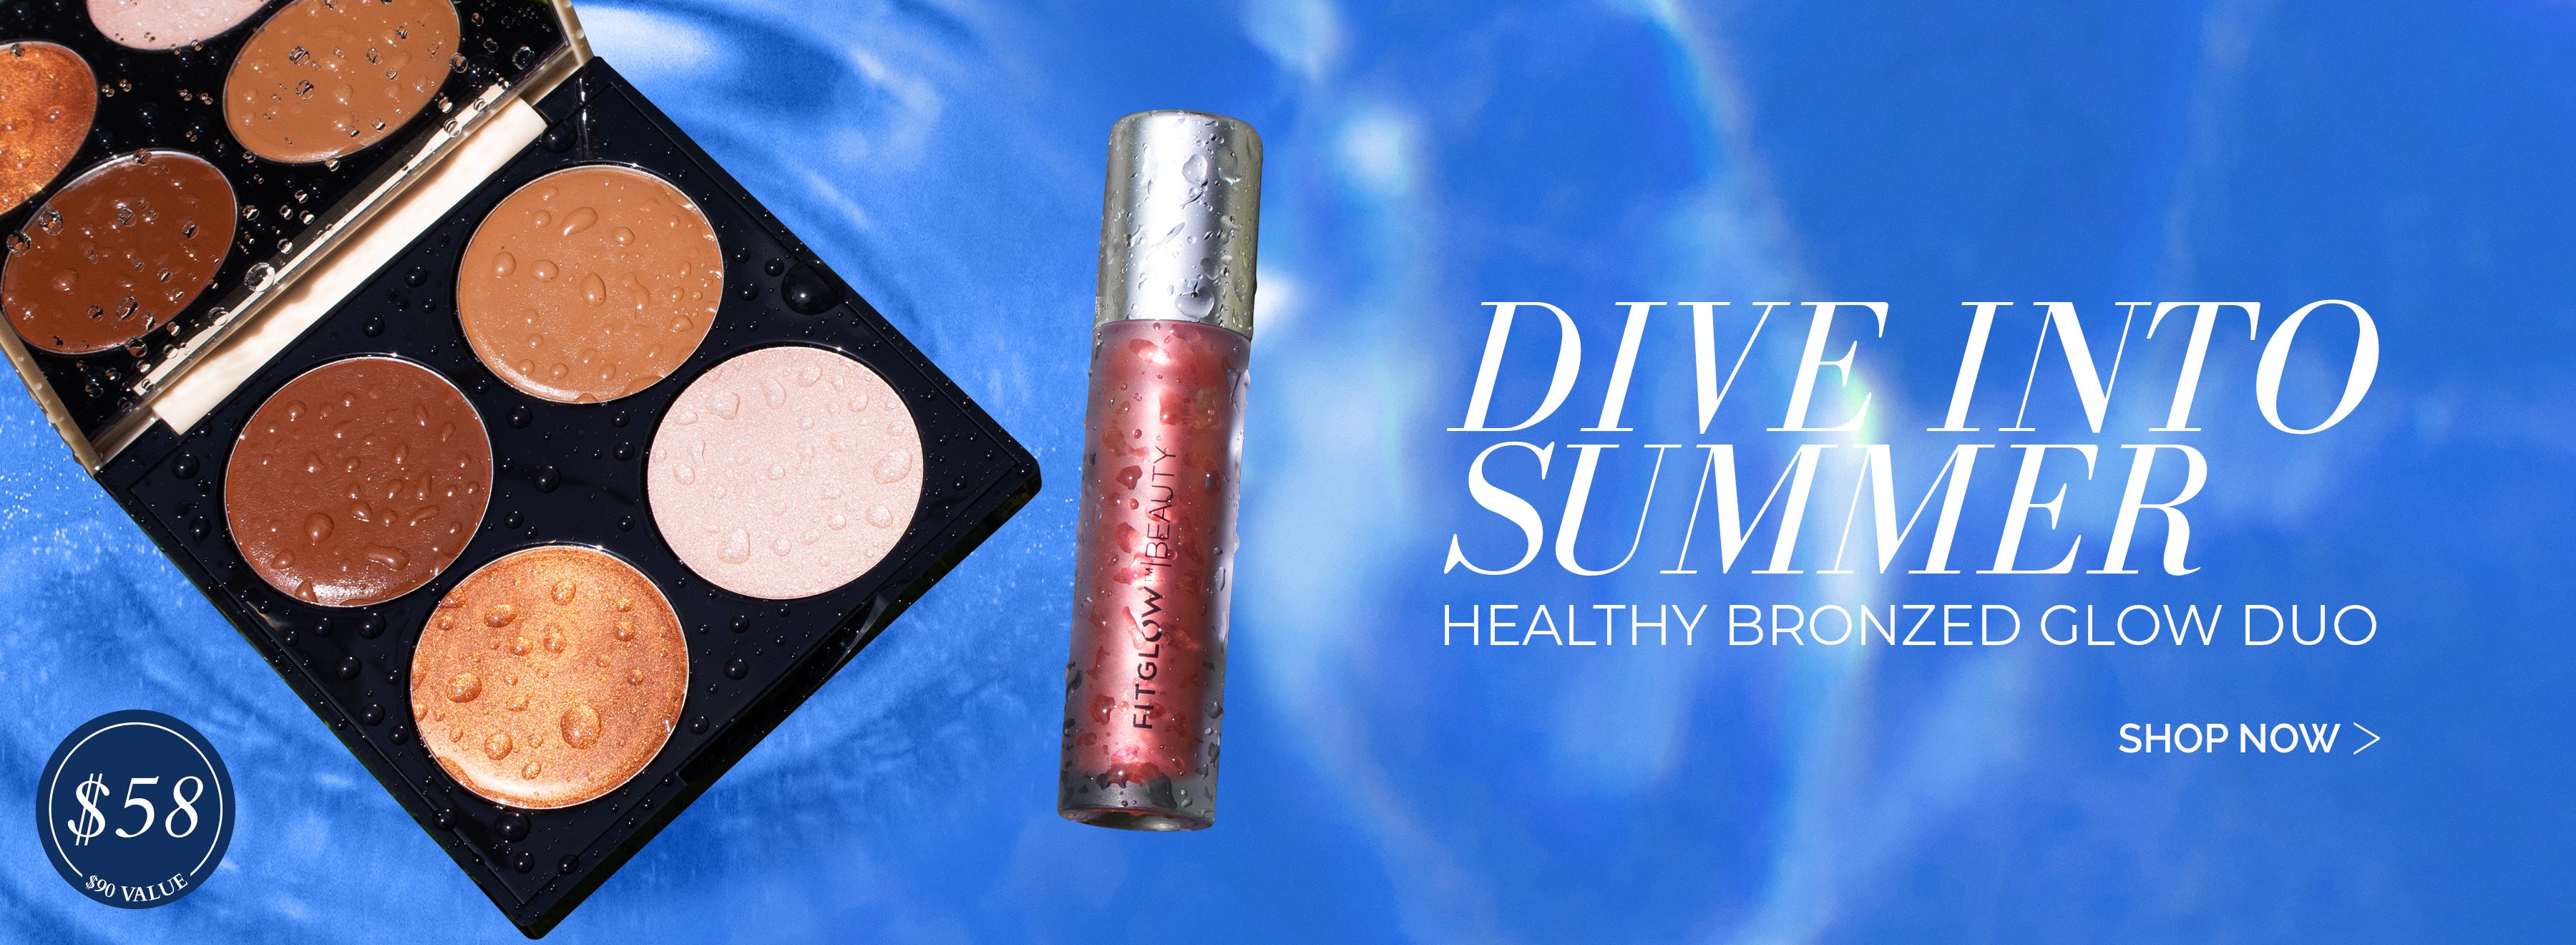 Dive into Summer - Healthy Bronzed Glow Duo - Shop Now